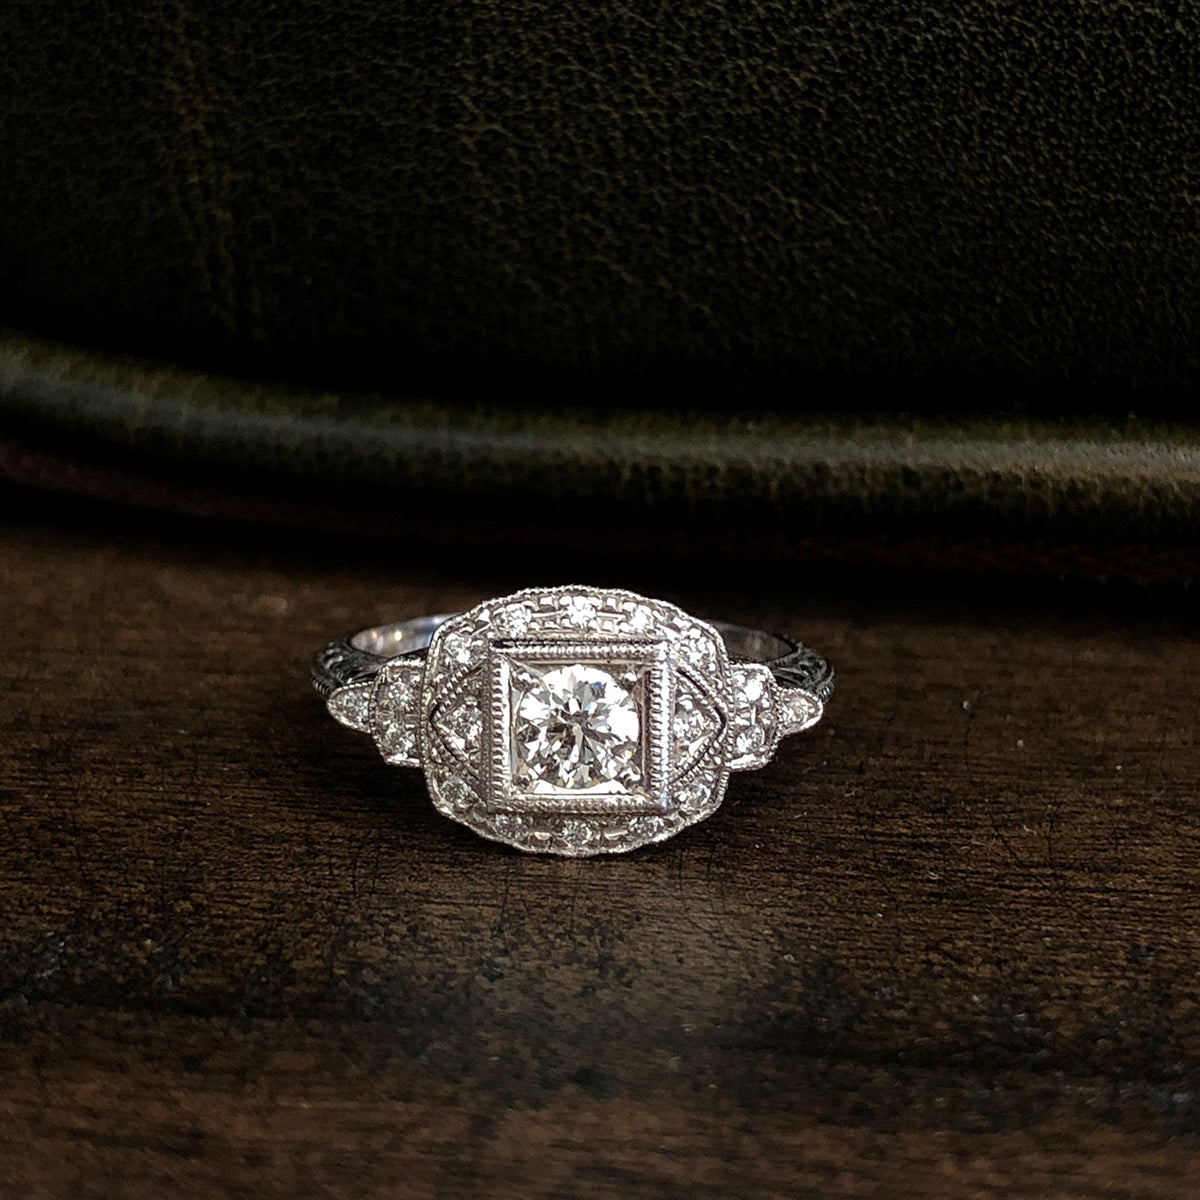 Hand Engraved 18kt Gold Diamond Ring A4965